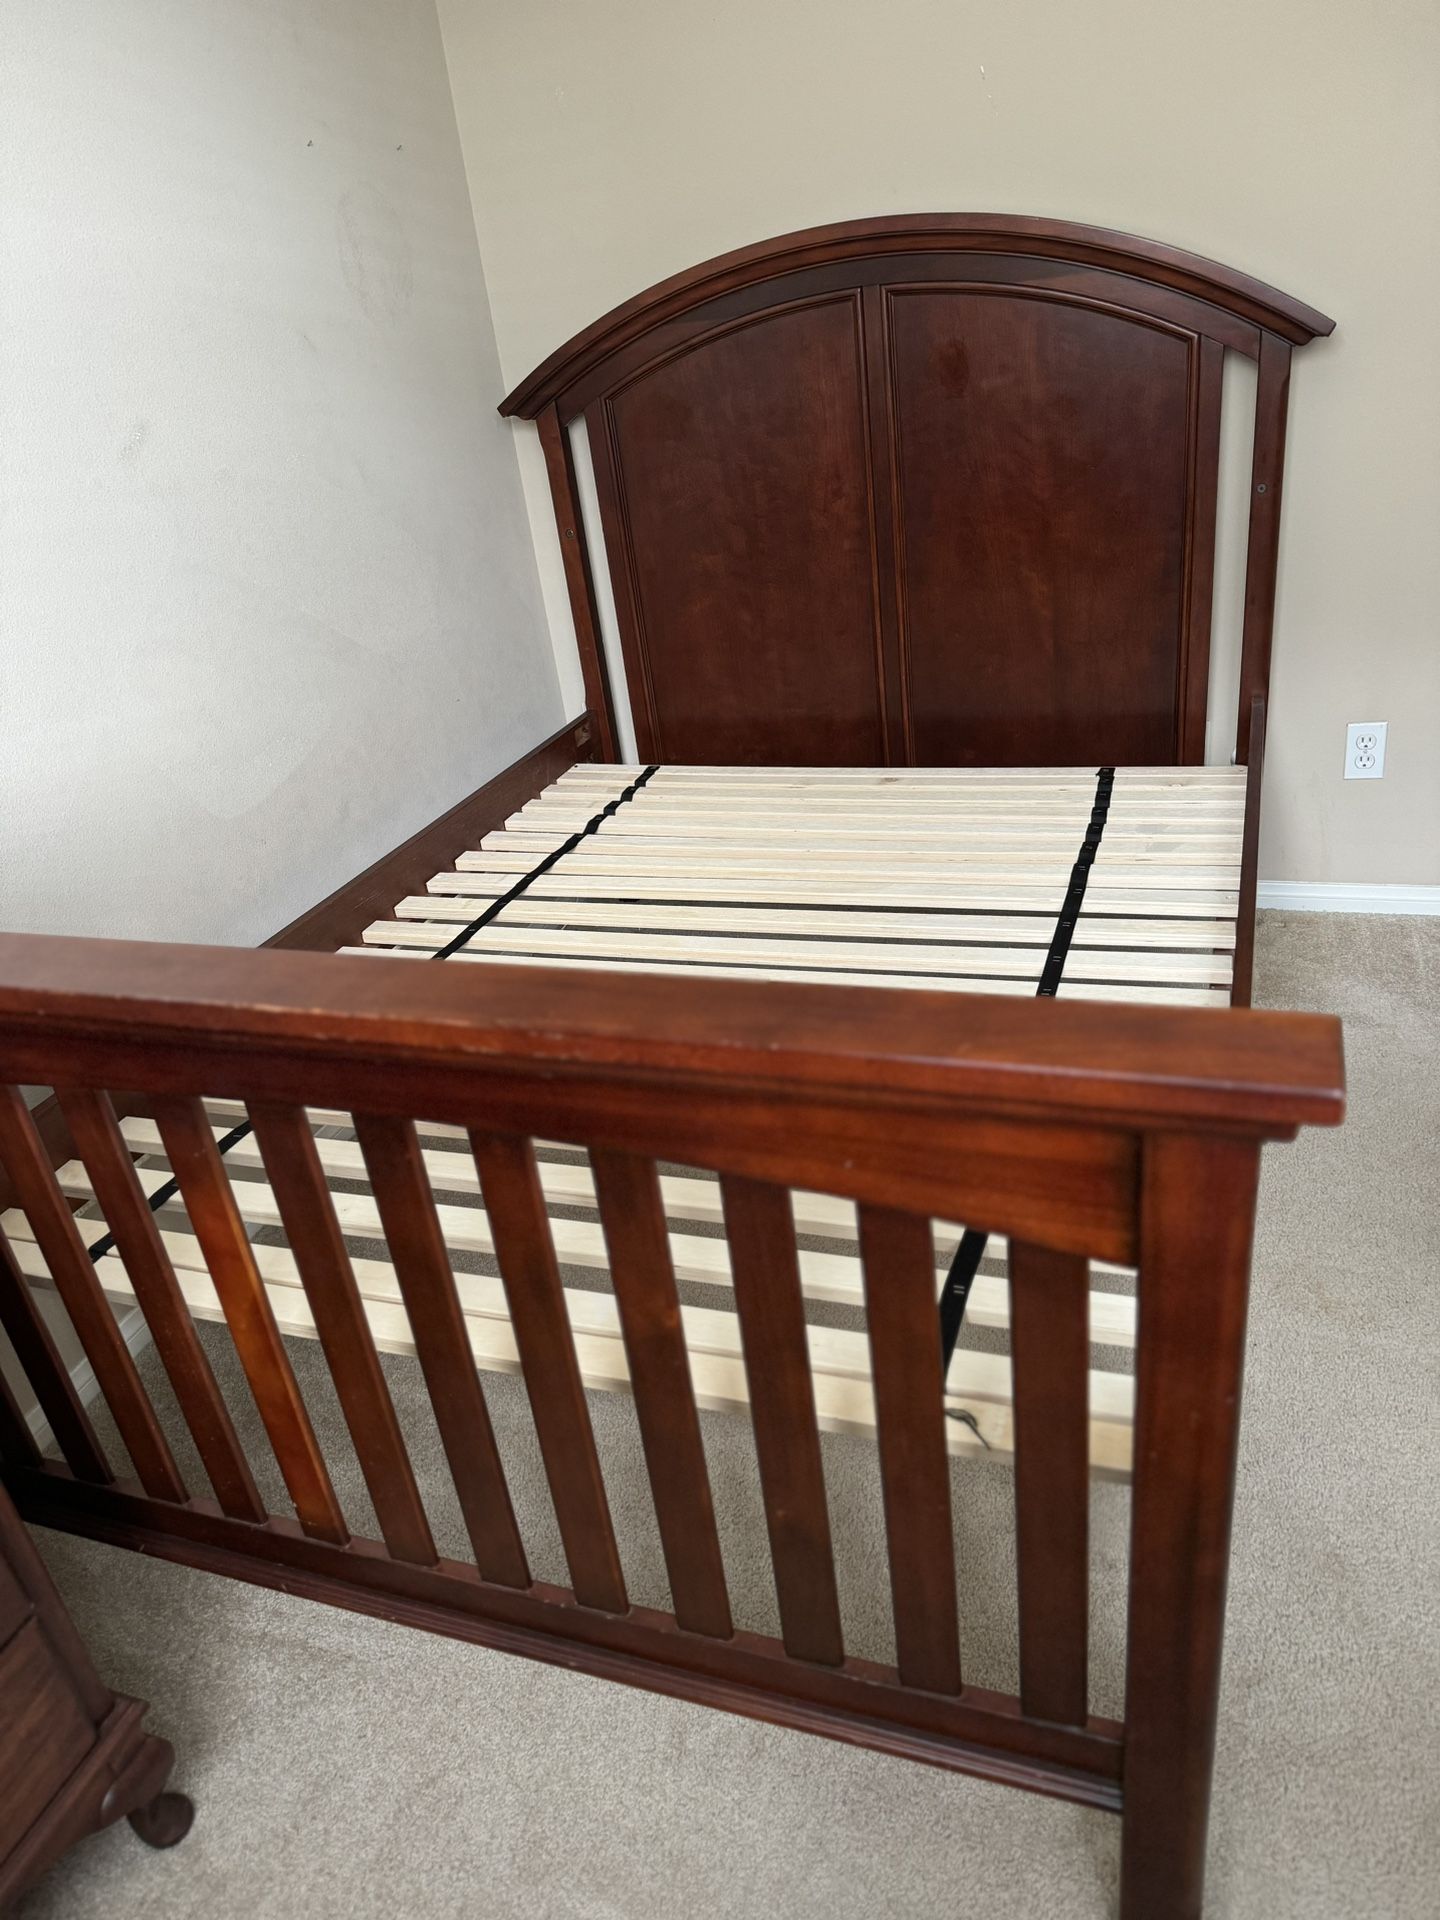 Full Bed Frame With Slats (No Mattress) And Night Stand 